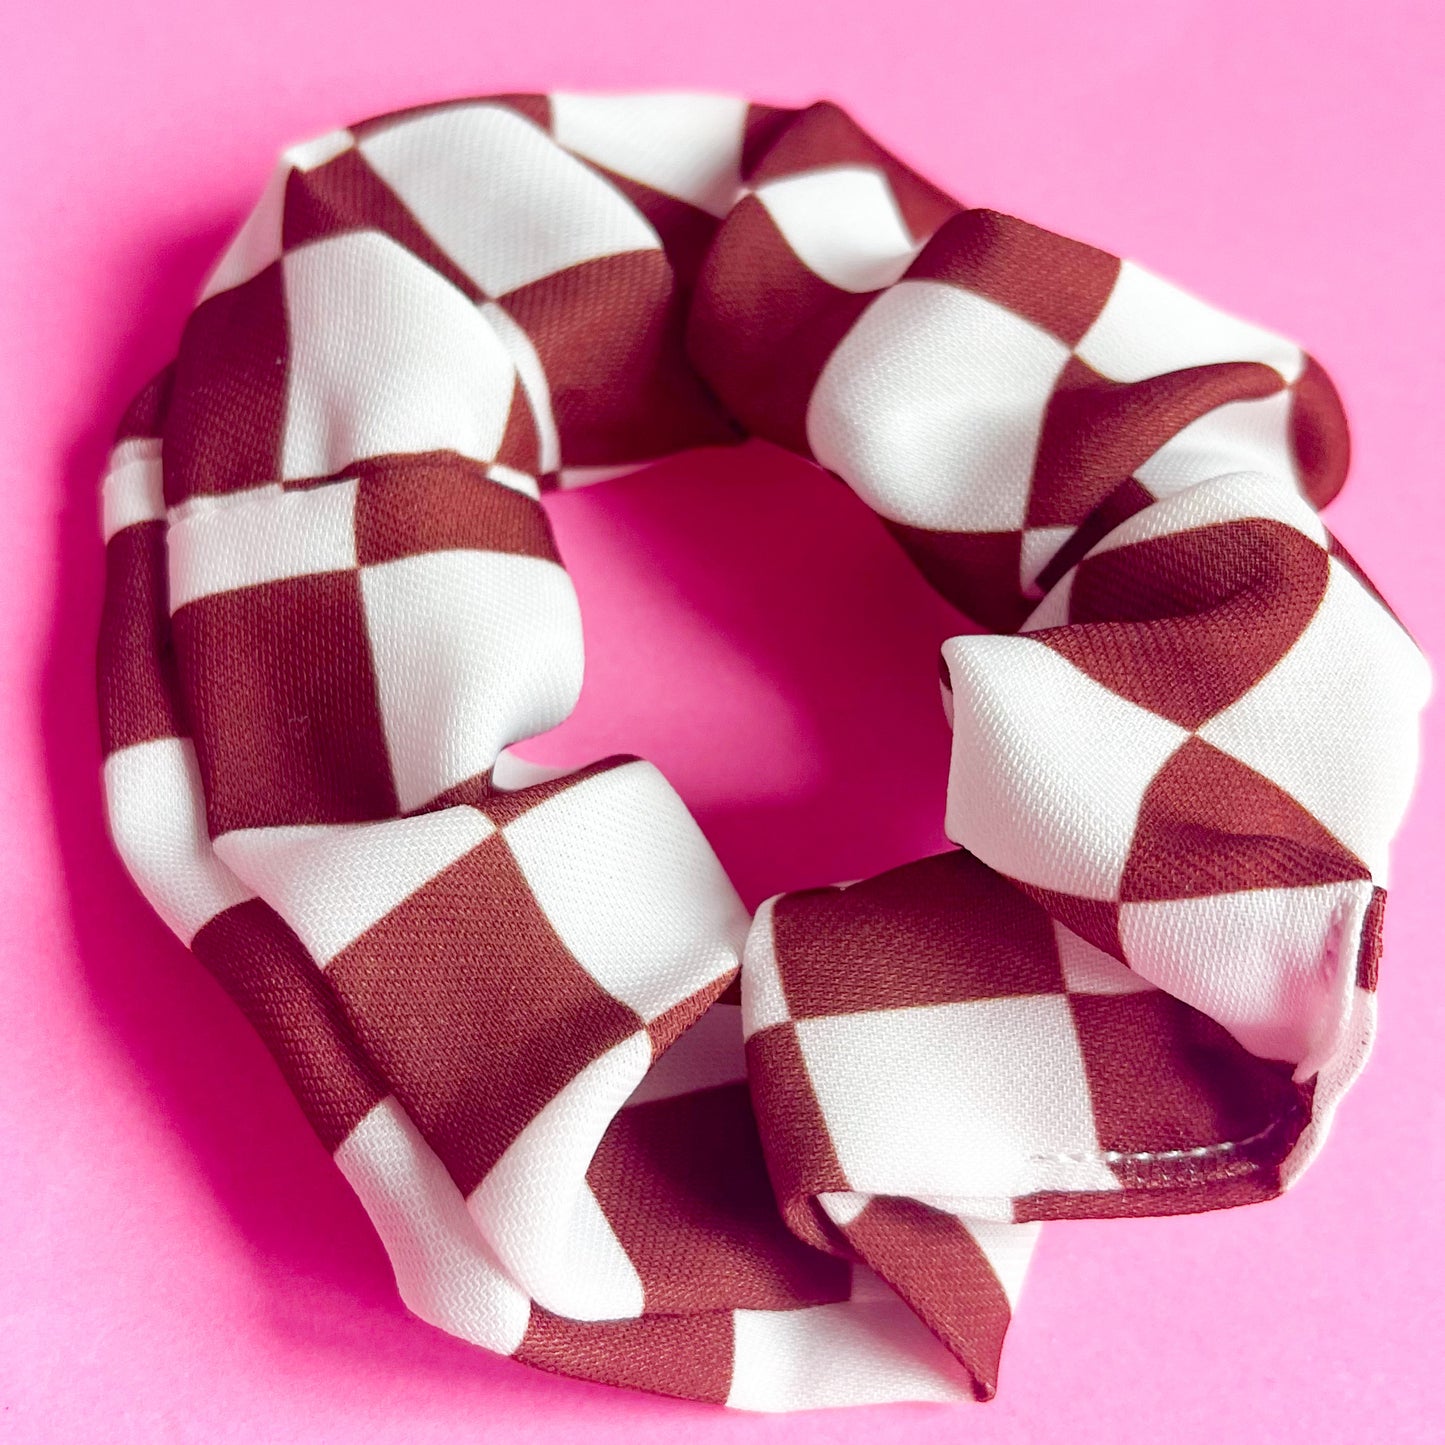 Brown and White Checkered Scrunchie